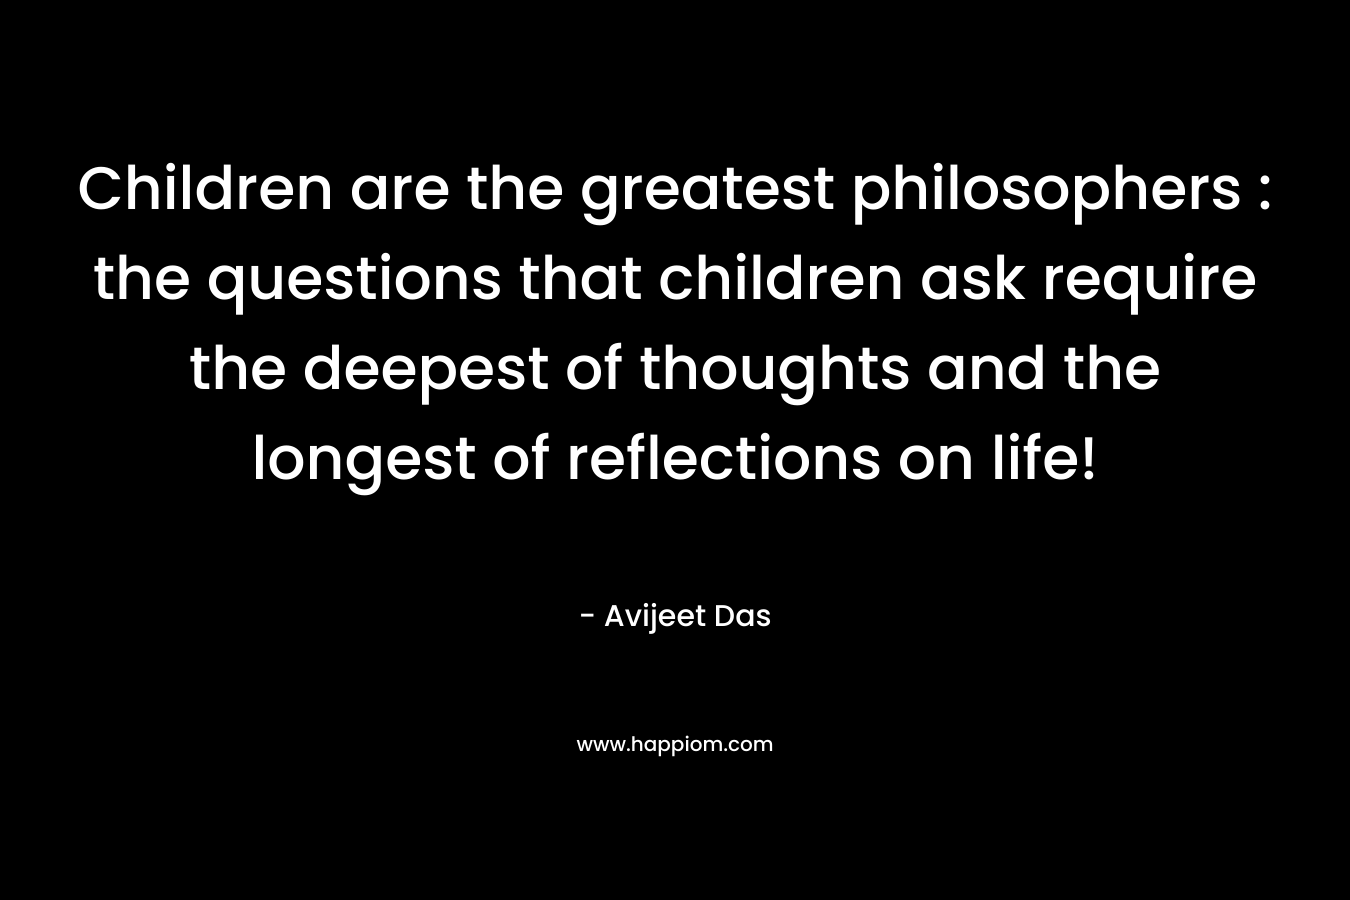 Children are the greatest philosophers : the questions that children ask require the deepest of thoughts and the longest of reflections on life!